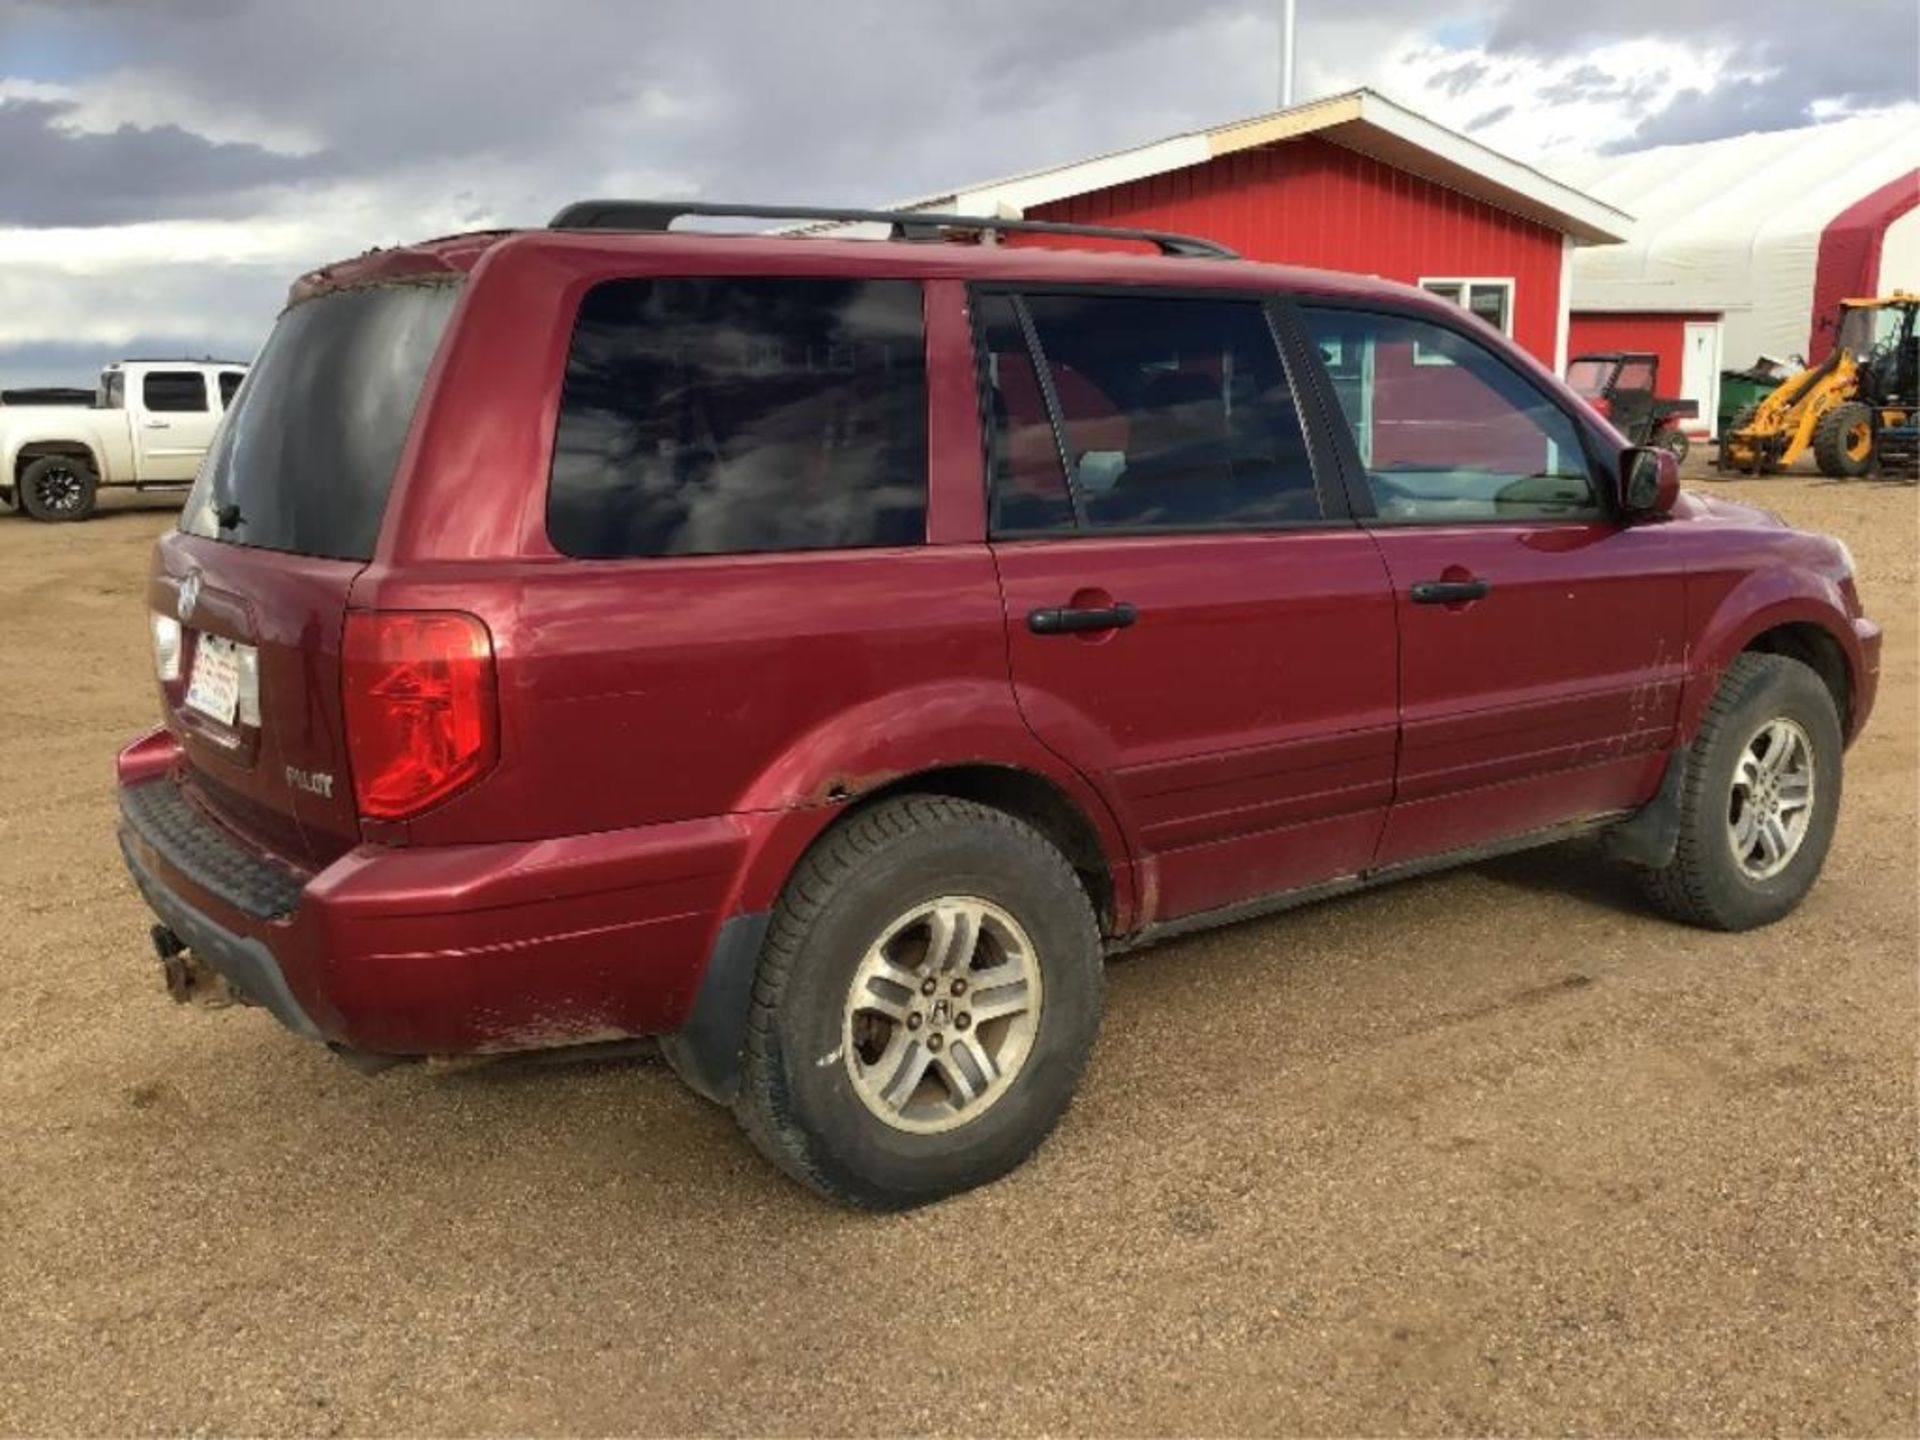 2003 Honda Pilot 4x4 SUV VIN 2HKYF18573H000088 3.5L Vtec Eng, A/T, 377,491km, 8-pass, Leather Int - Image 3 of 12